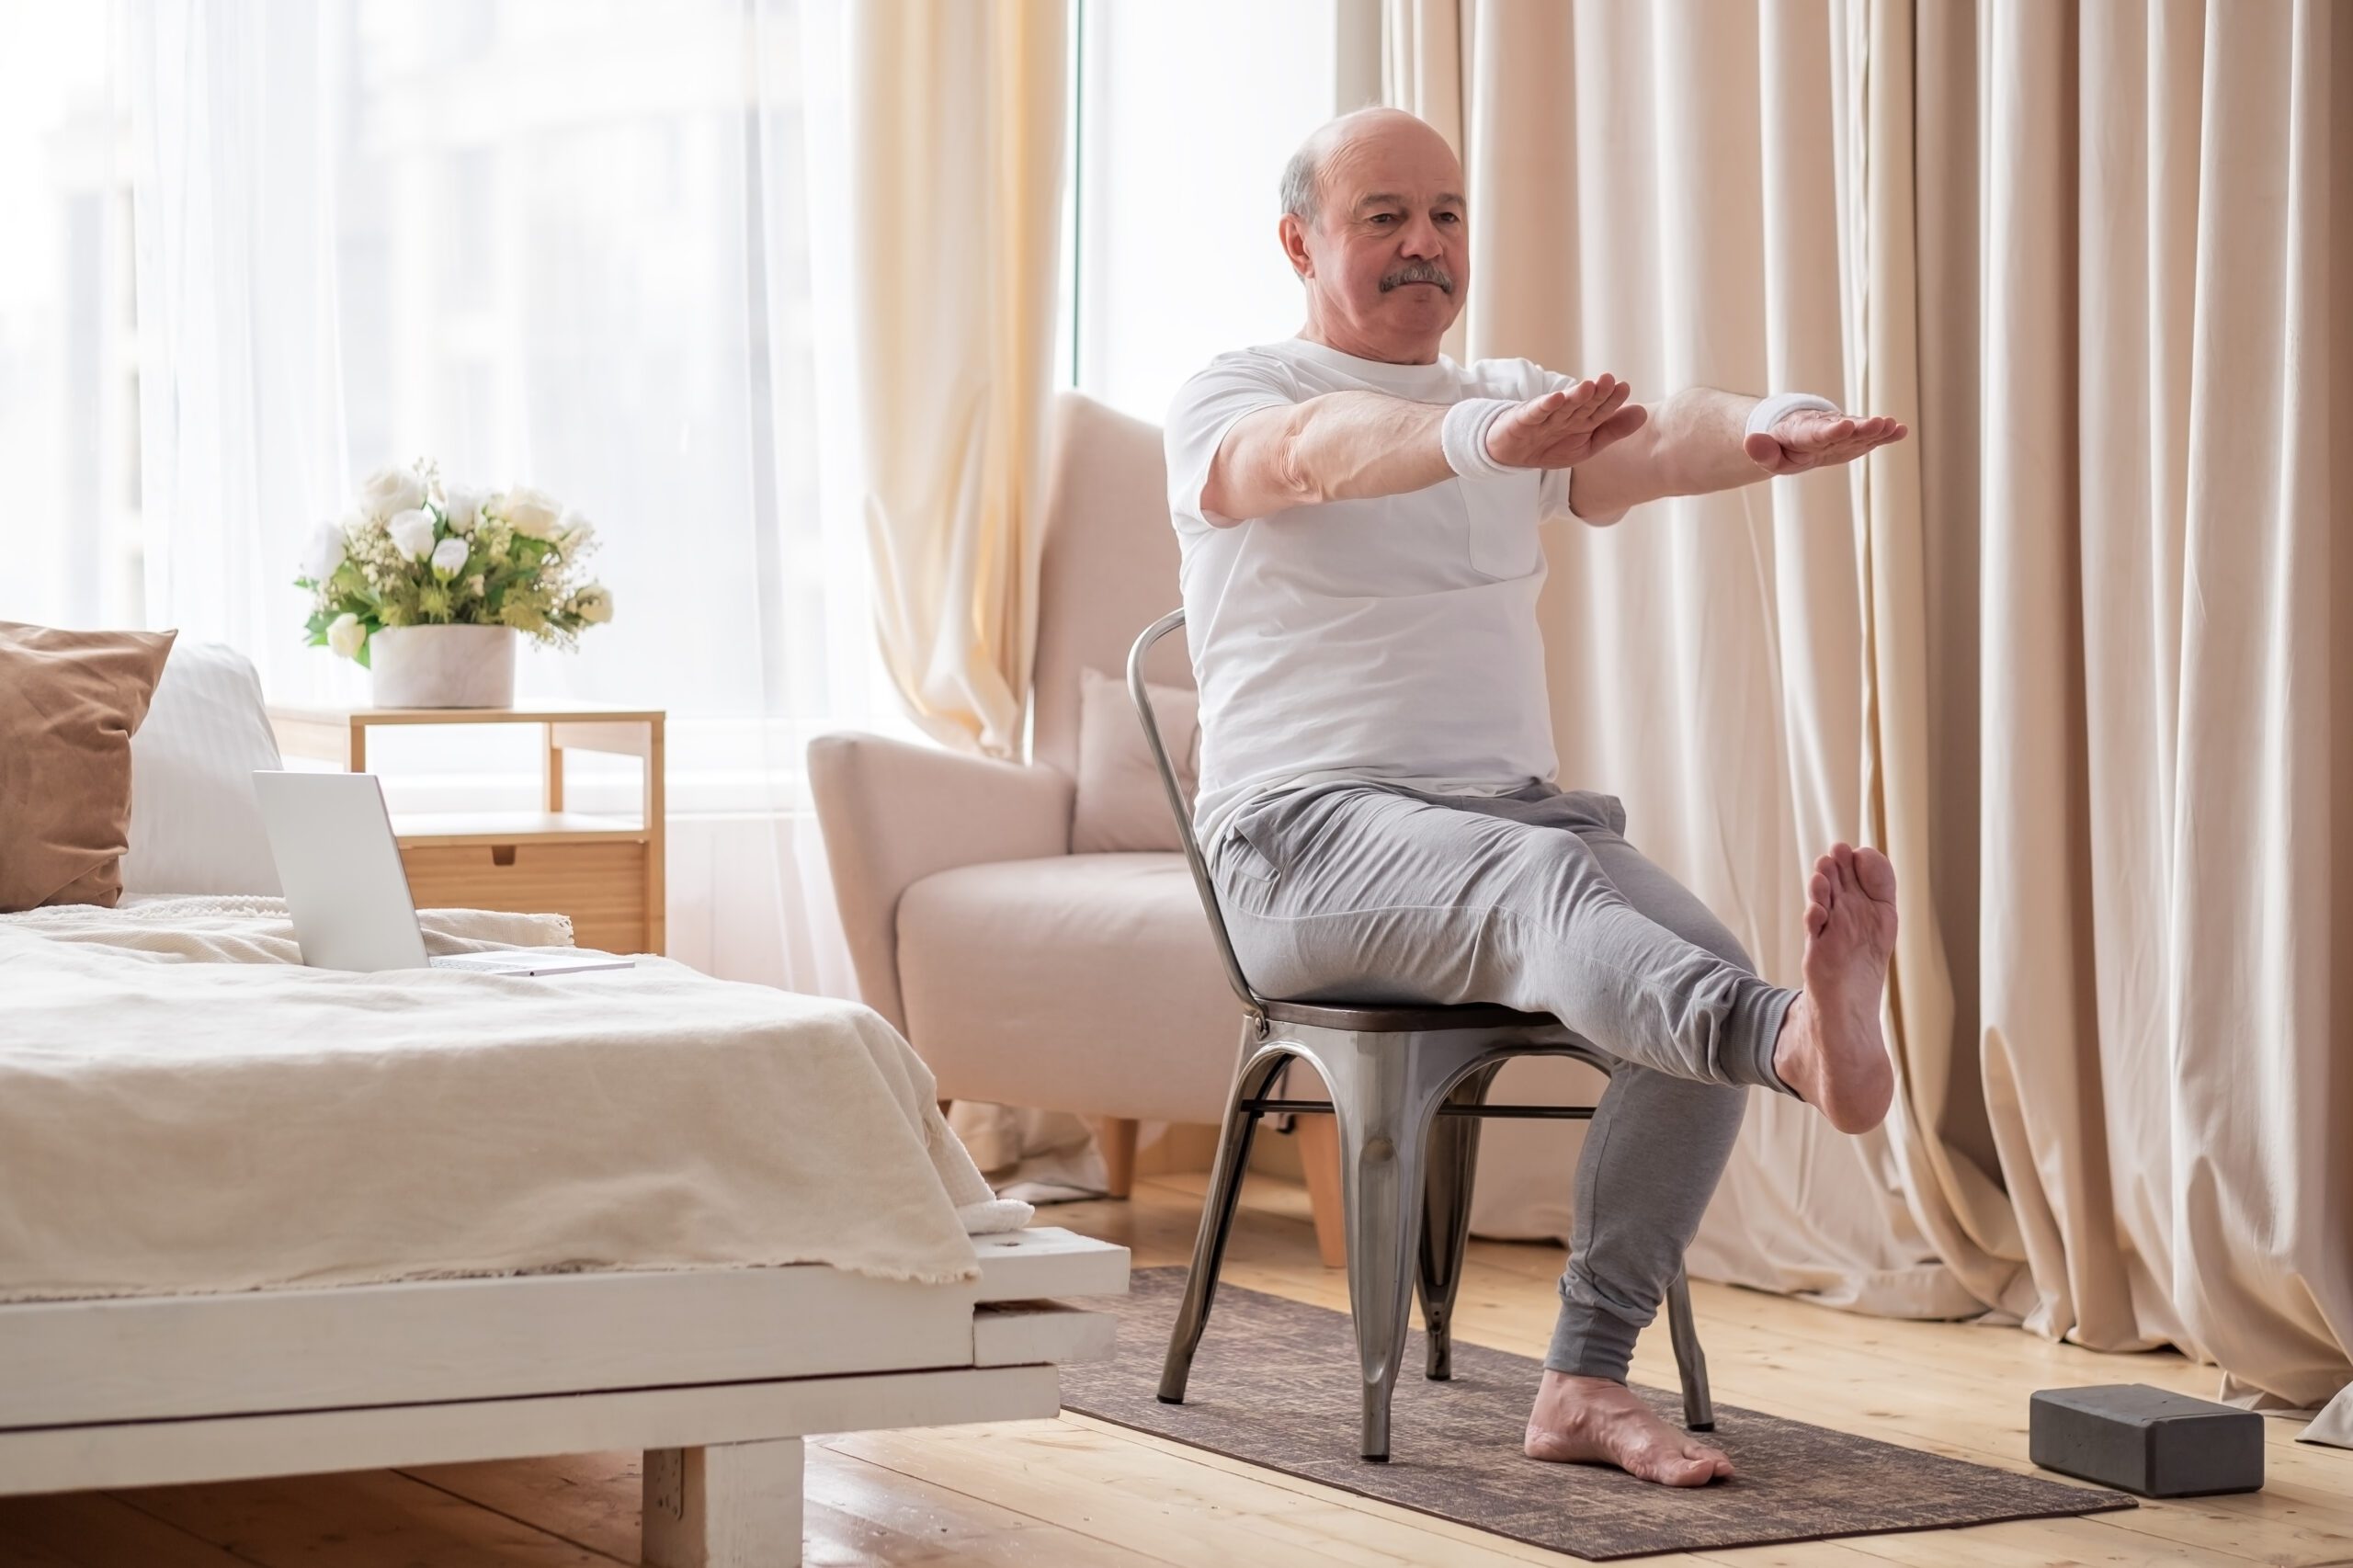 Elderly man practicing yoga for legs and hands using chair.